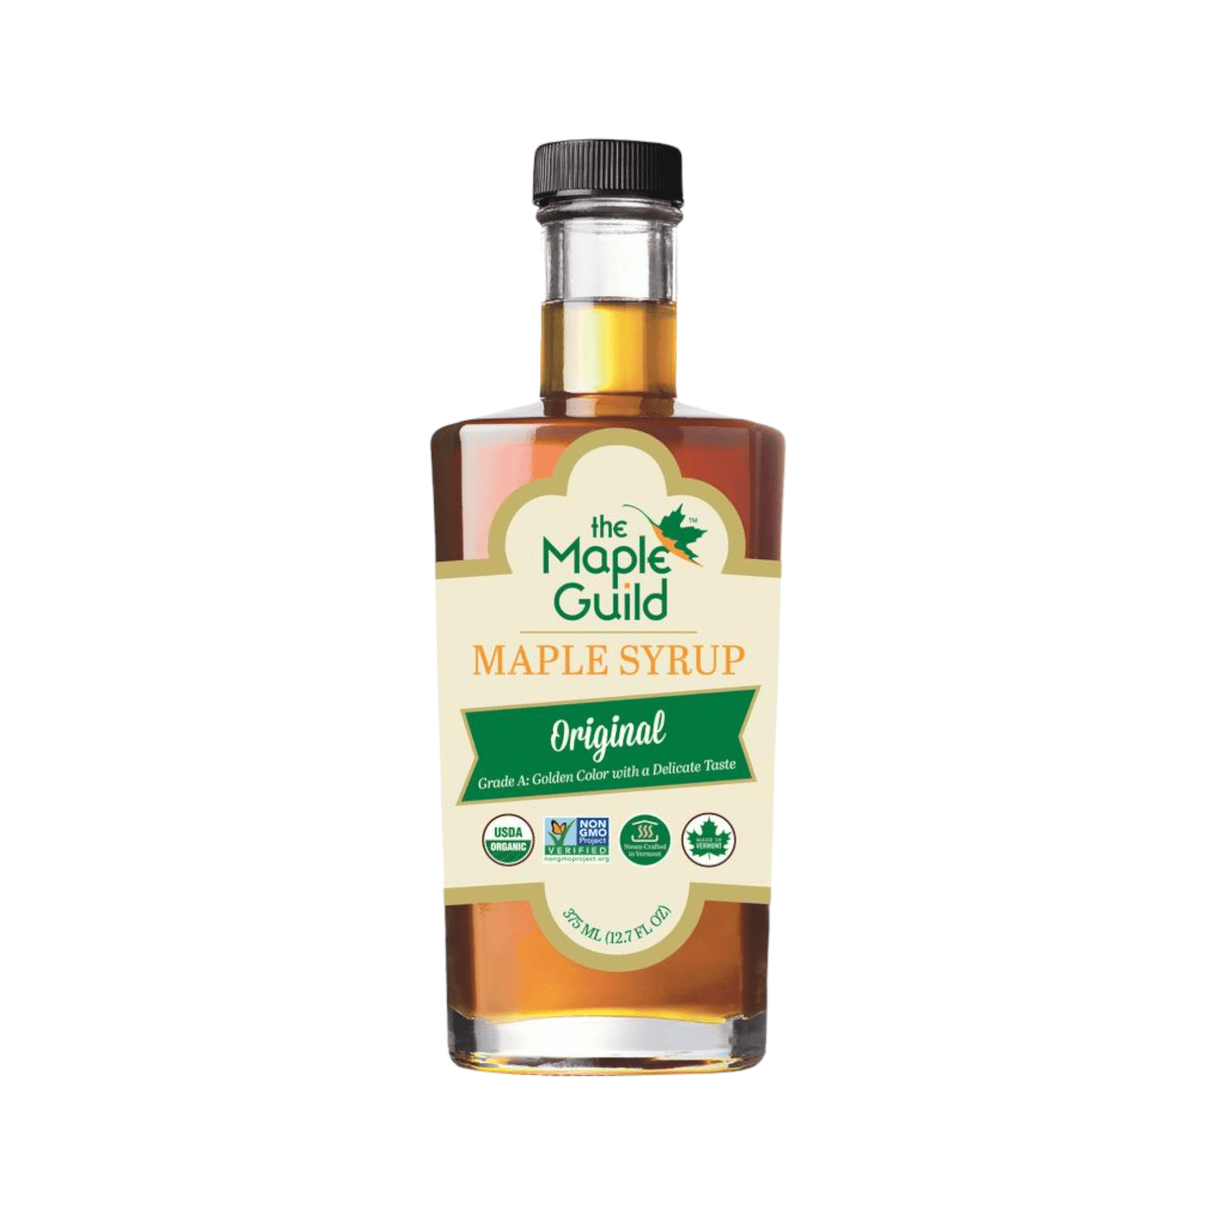 The Maple Guild Maple Syrup Original